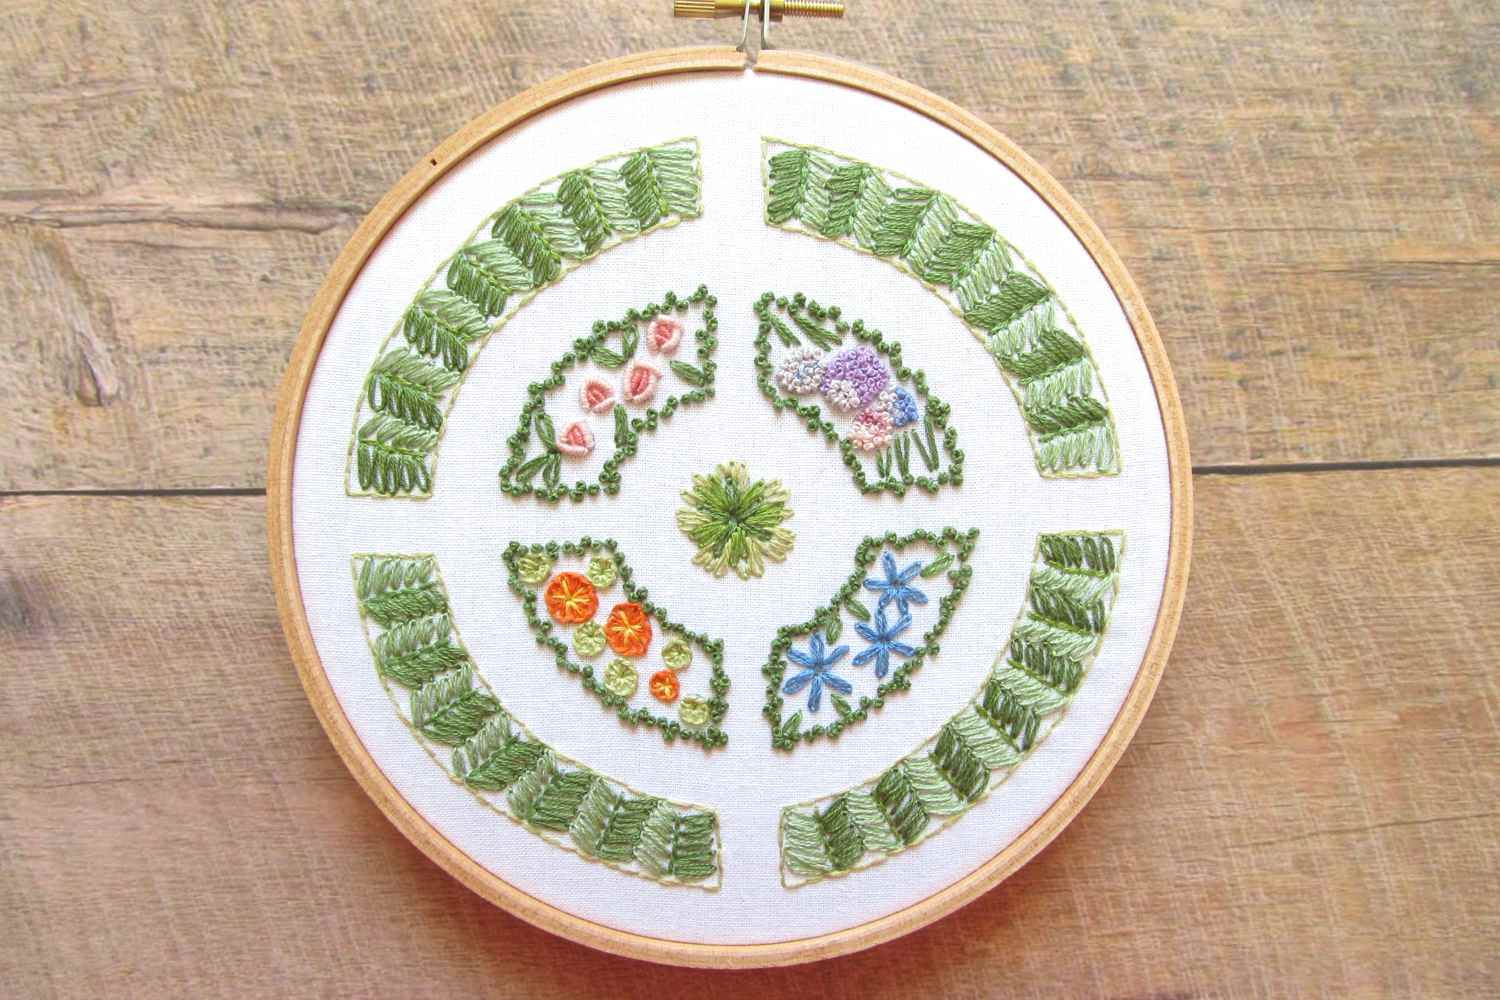 Herb Embroidery Patterns 10 Gardening Inspired Embroidery Patterns